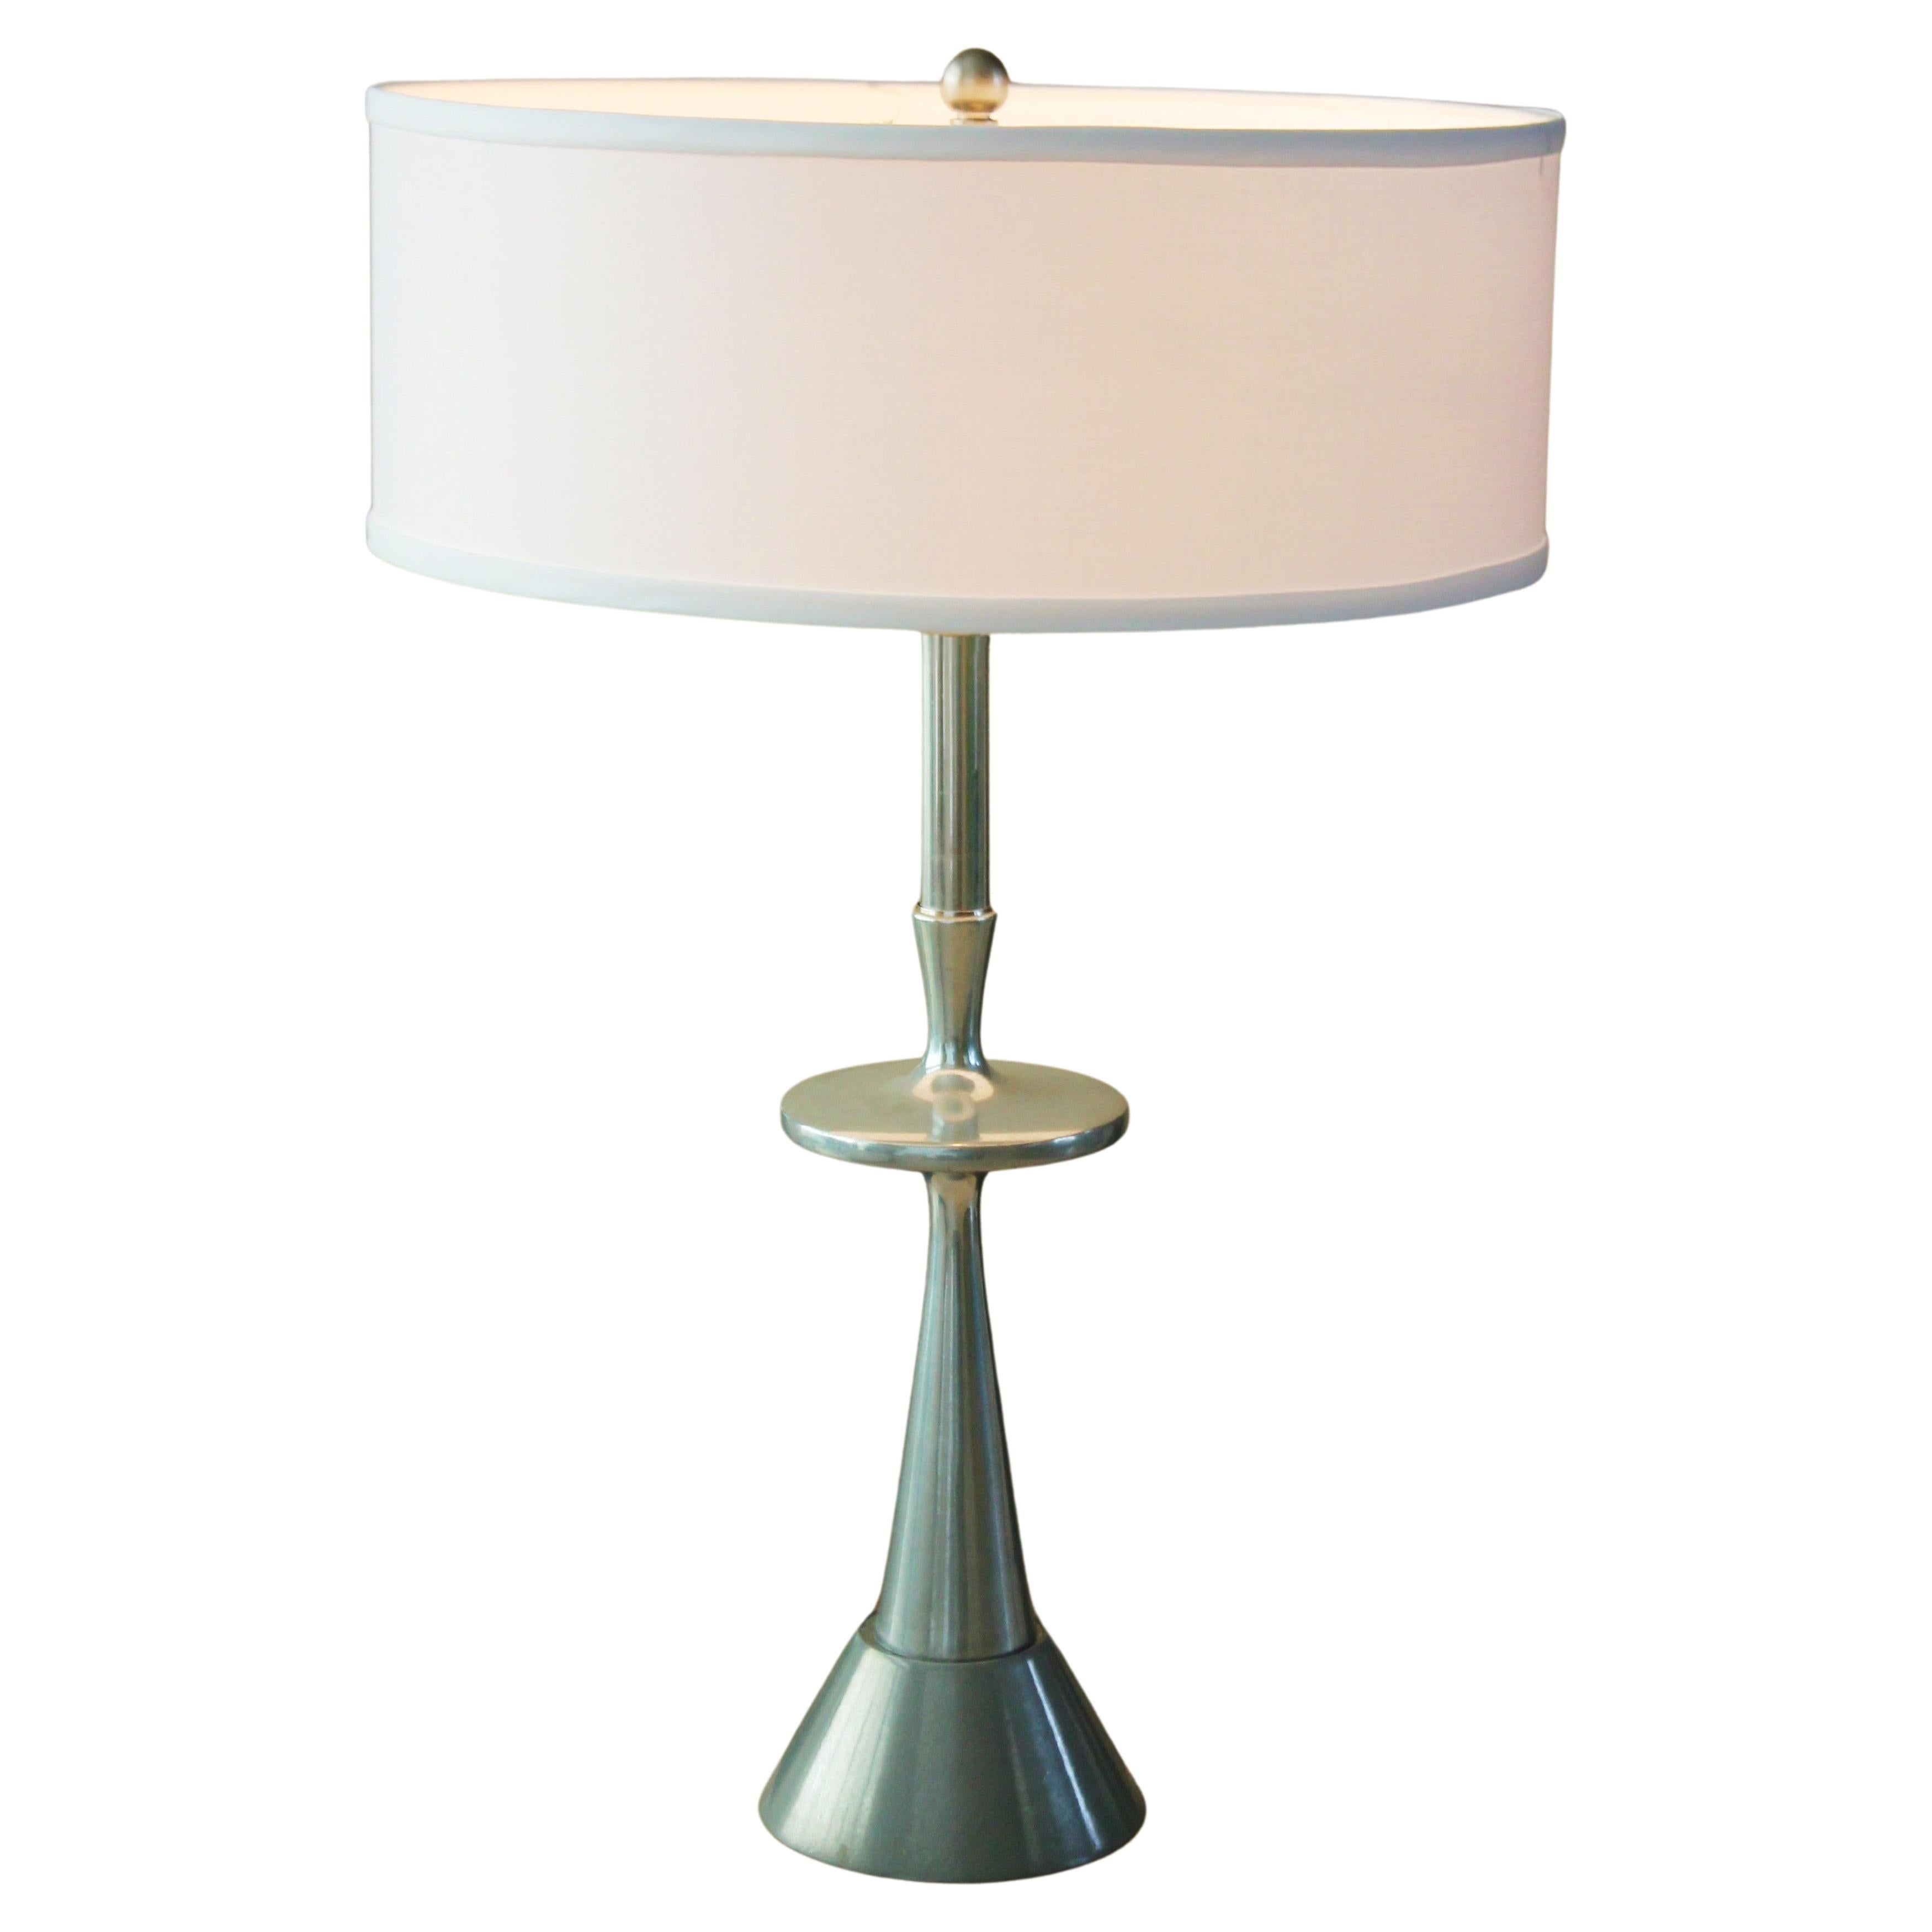 Italian Polished Cast Aluminum Mid Century Saucer Table Lamp 1950s Russel Wright For Sale